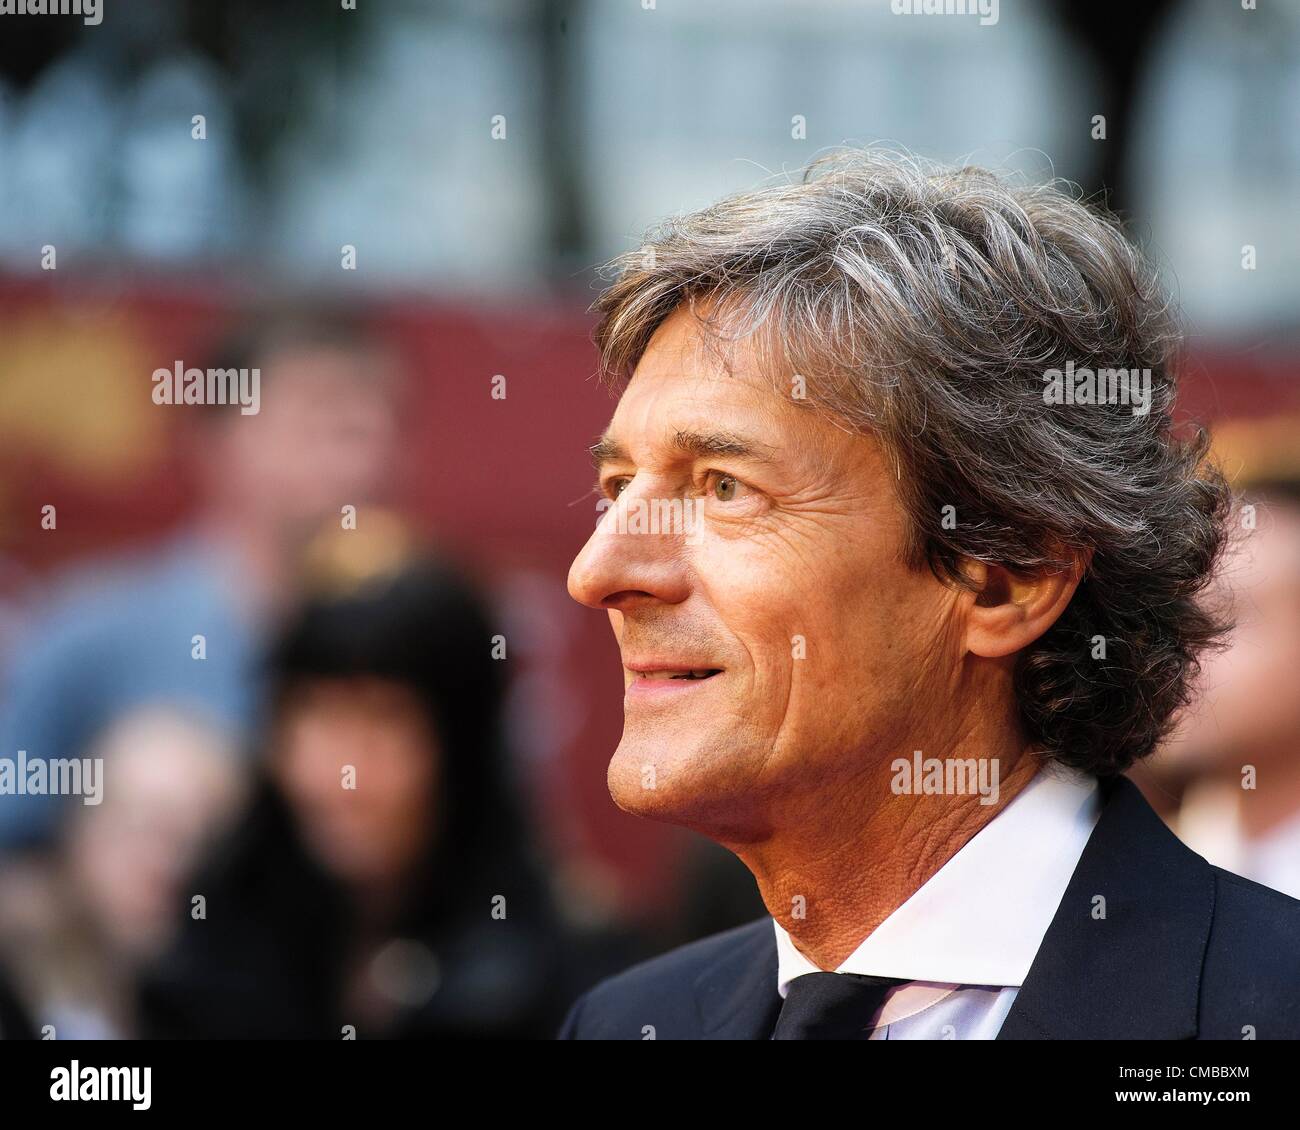 Nigel Havers attends the Great British Premiere of Chariots of Fire on 10/07/2012 at The Empire, Leicester Square, London. Based on a true story, Chariots of Fire was the winner of four Academy Awards®, including Best Picture and Best Original Screenplay.. Persons pictured: Nigel Havers. Picture by Julie Edwards Stock Photo